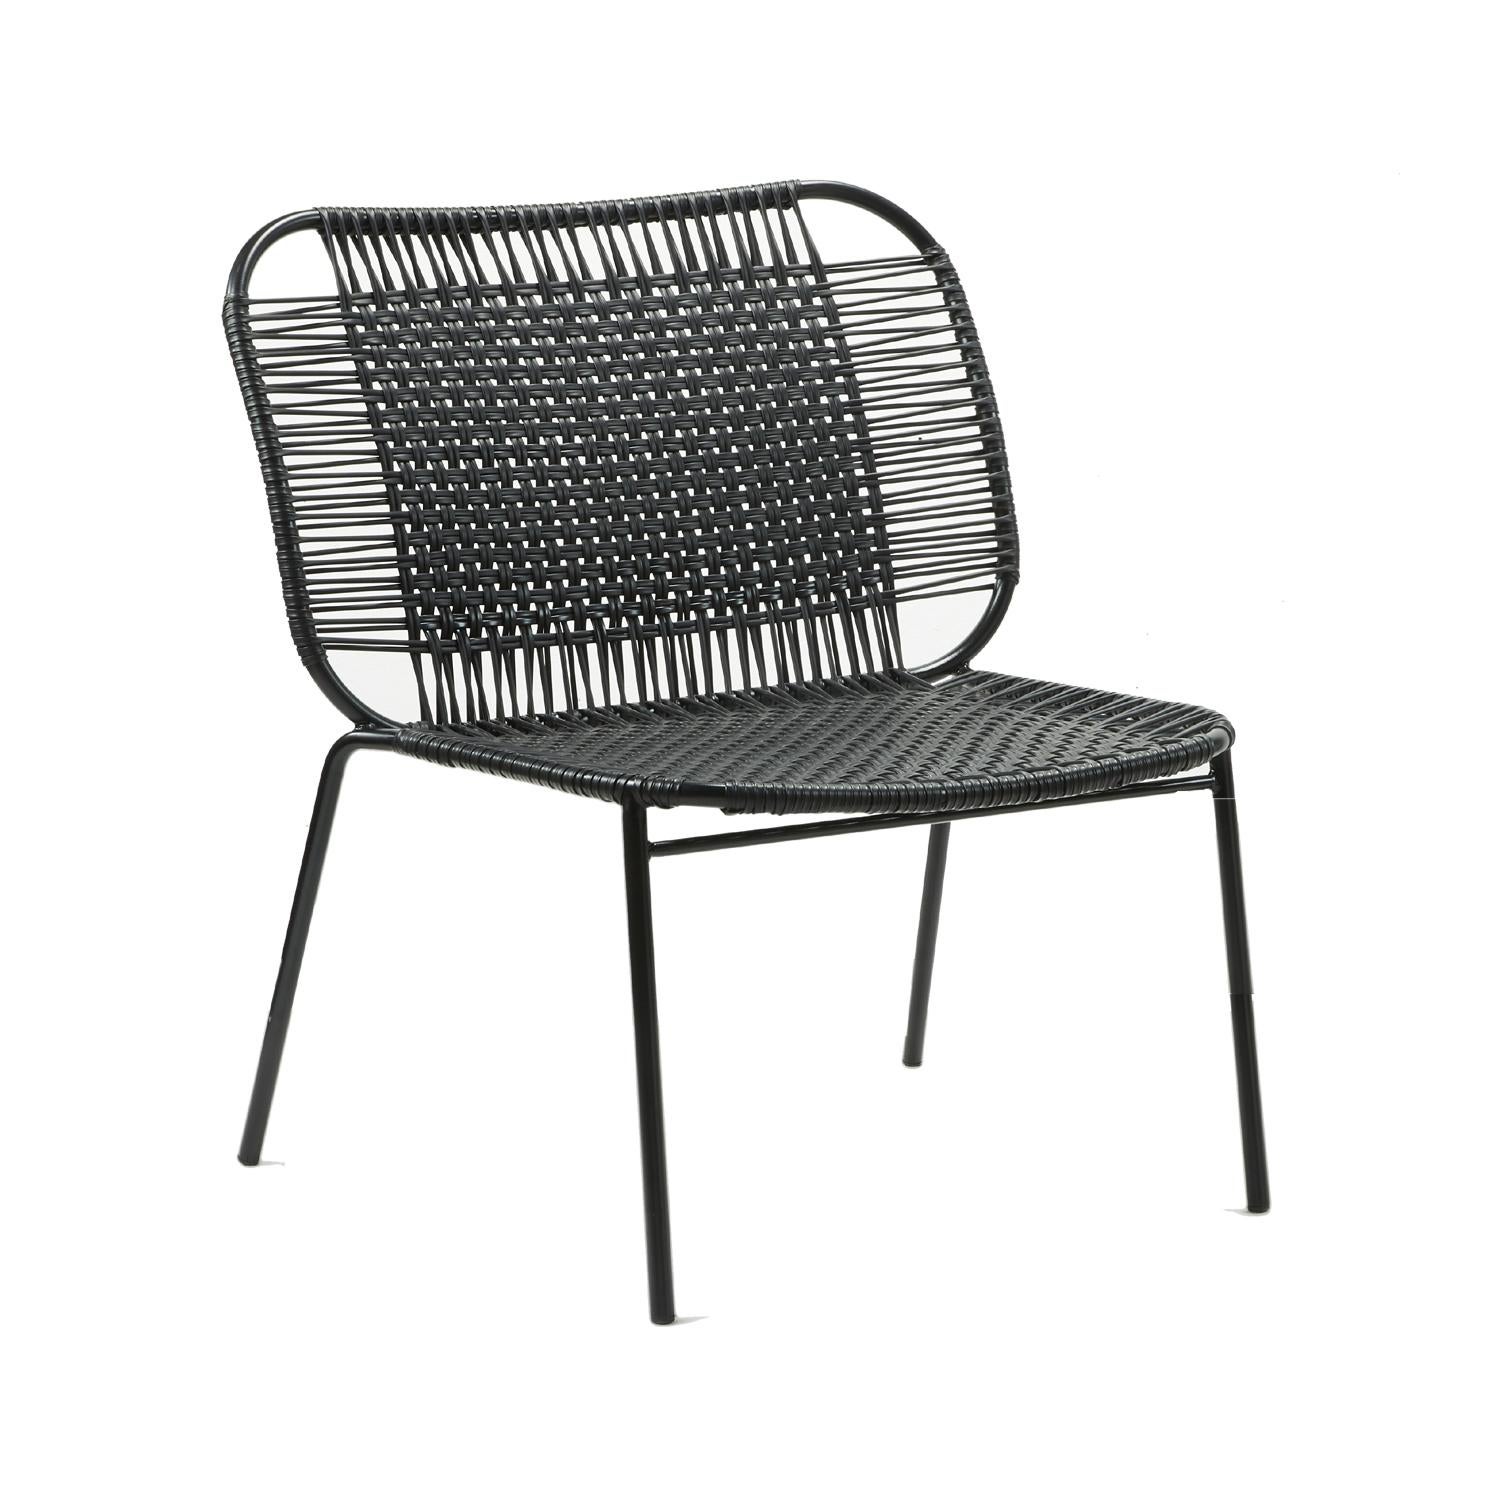 Black Cielo lounge low chair by Sebastian Herkner
Materials: Galvanized and powder-coated tubular steel. PVC strings are made from recycled plastic.
Technique: Made from recycled plastic and weaved by local craftspeople in Cartagena, Colombia.